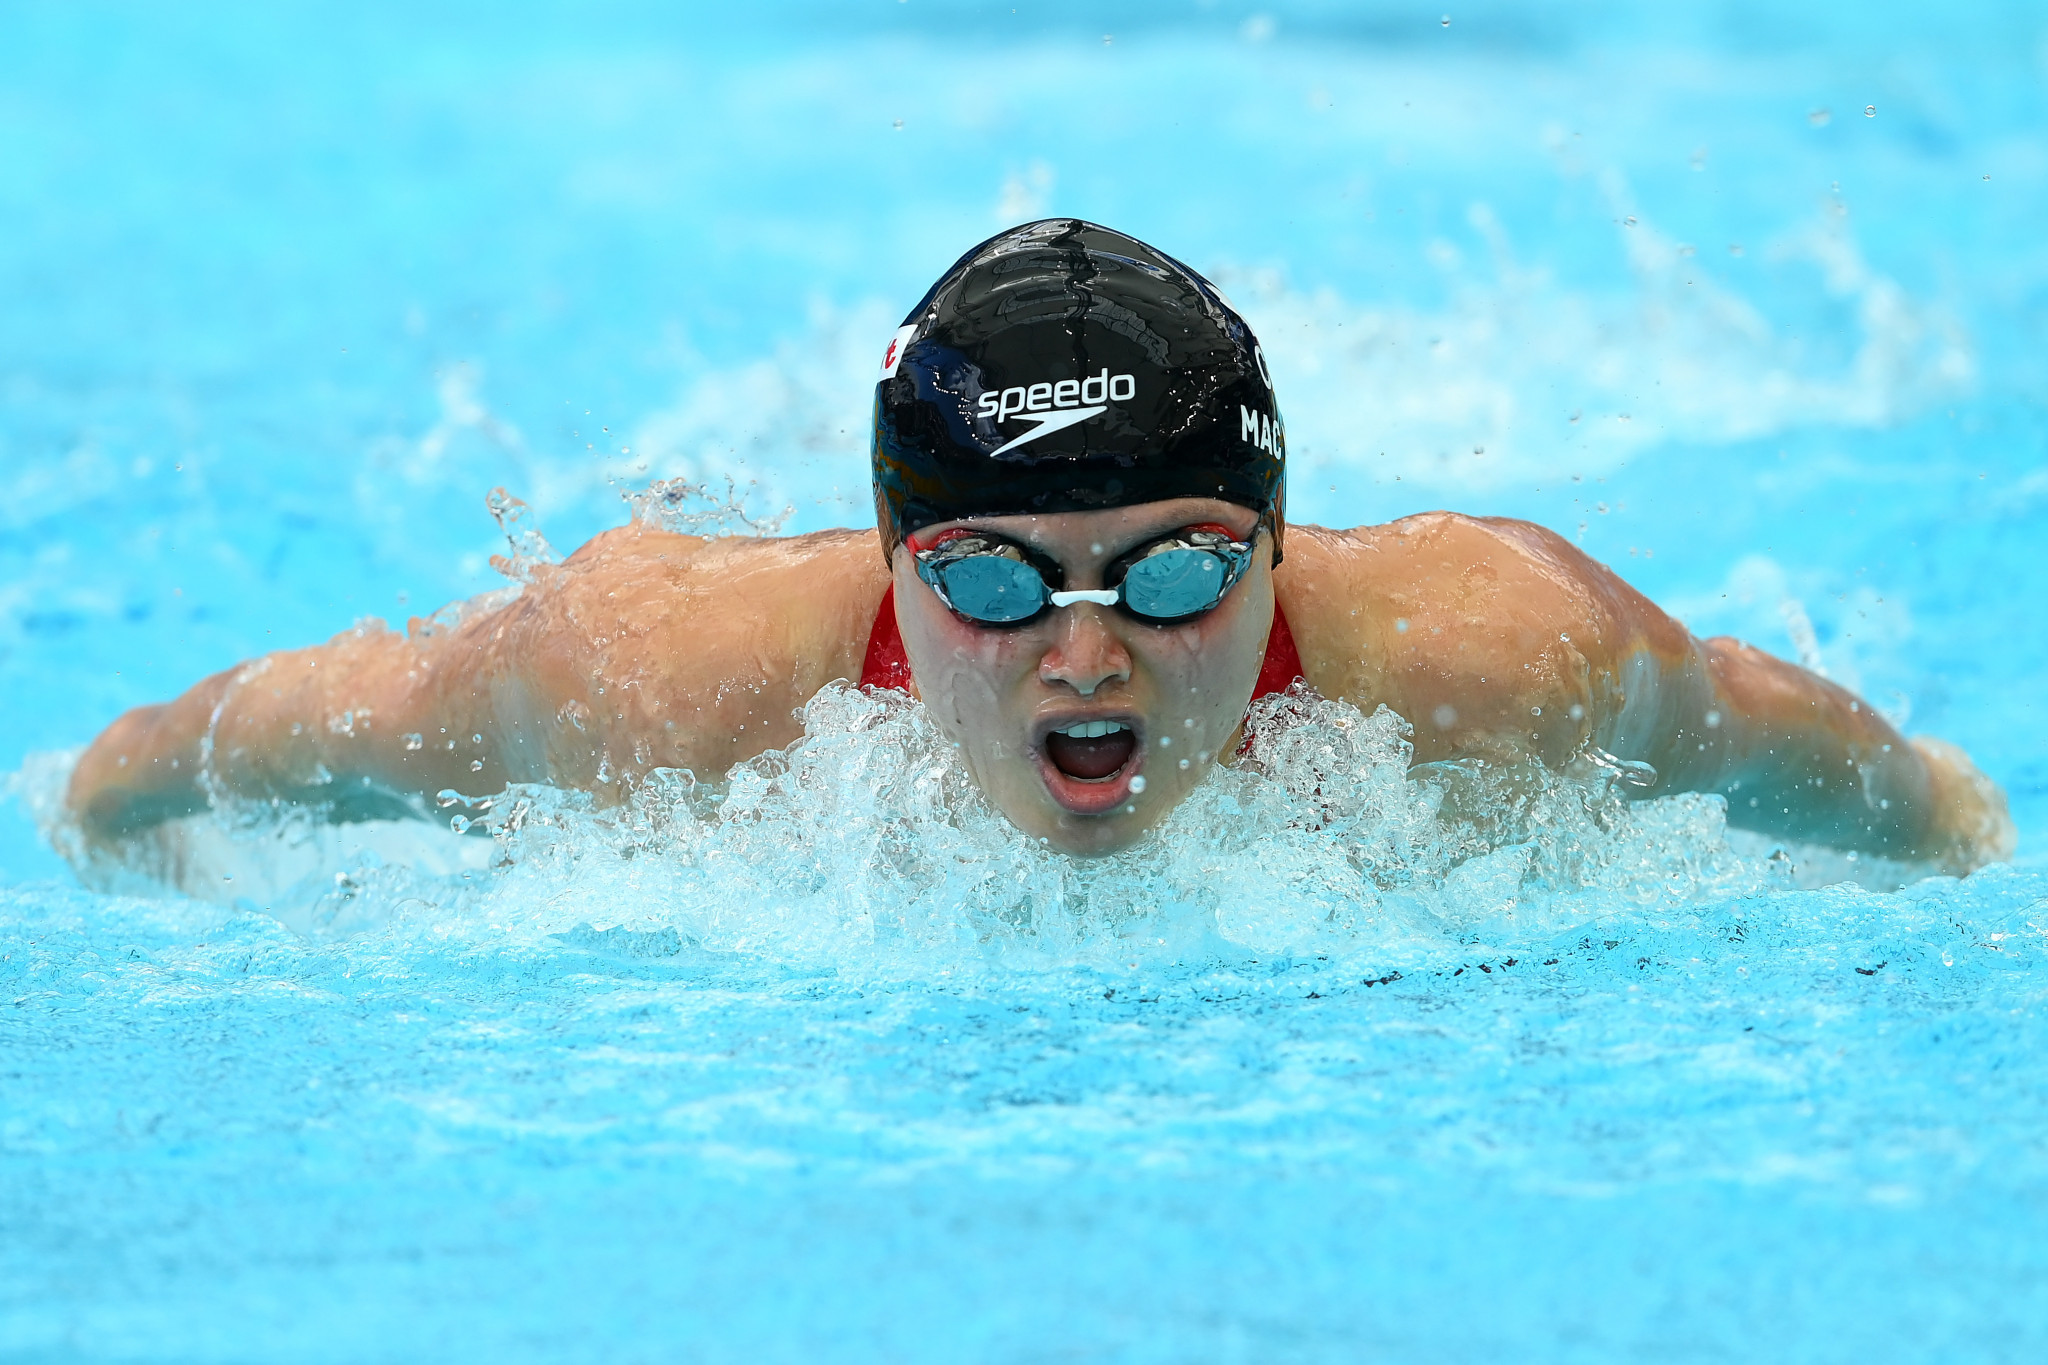 Margaret MacNeil secured three medals at Tokyo 2020 ©Getty Images